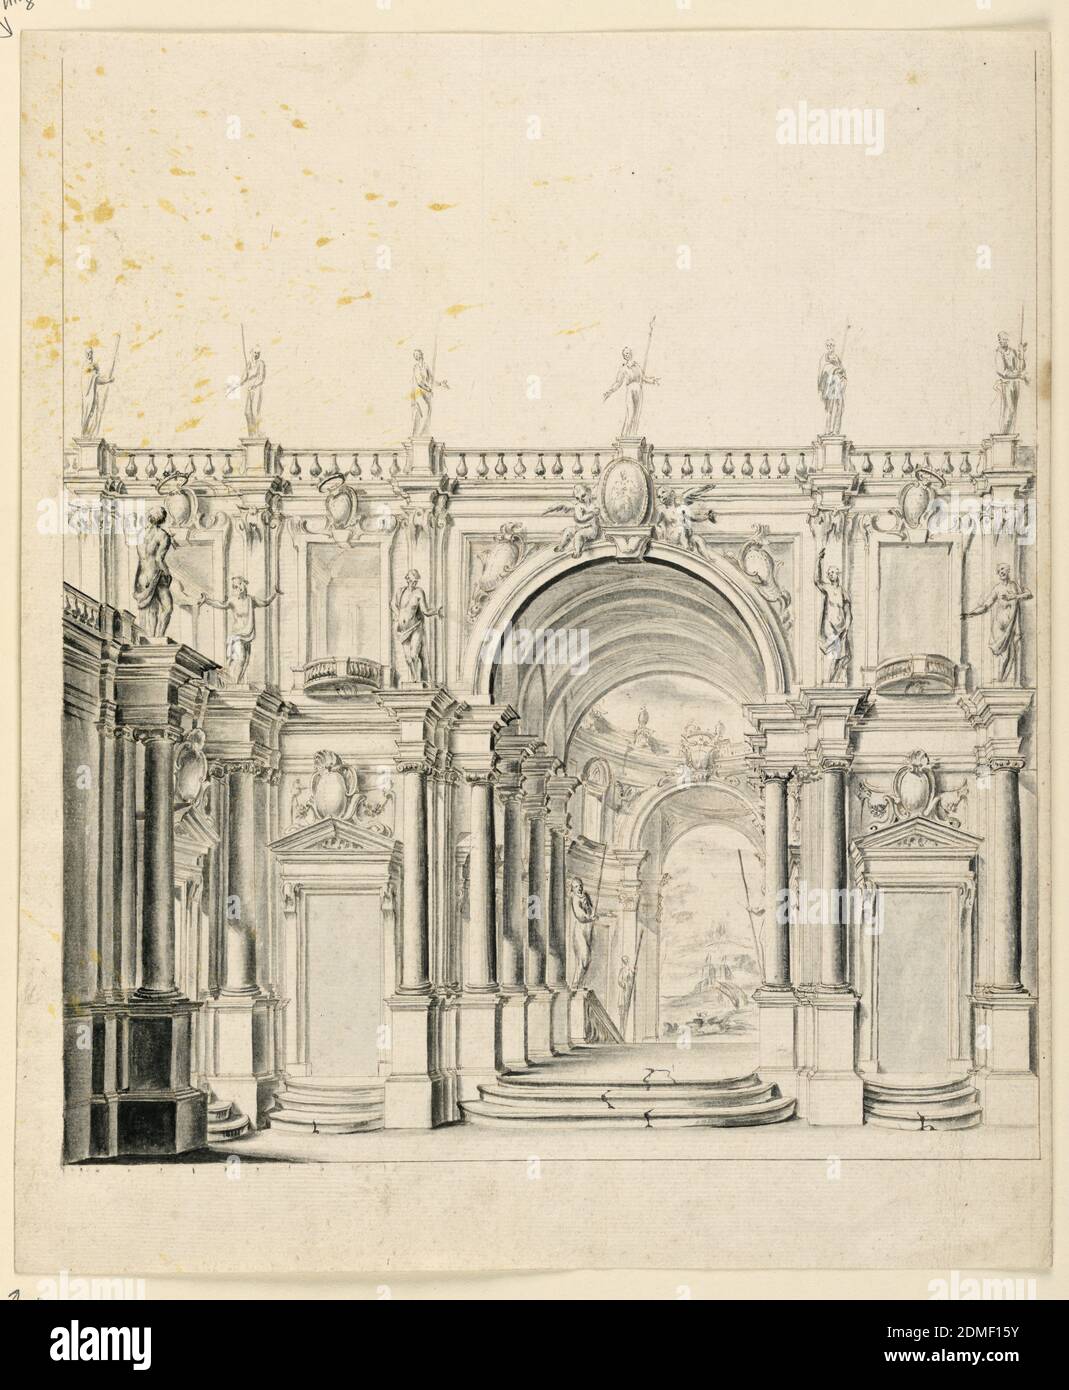 Stage Design: Palace Architecture, Pen and bistre, brush and sepia wash on paper, Vertical rectangle showing an exterior architectural space. A palace wall is topped with a balustrade and six sculptures. At center, below a coat-of-arms, cracked stairs lead to an archway., Italy, early 18th century, theater, Drawing Stock Photo